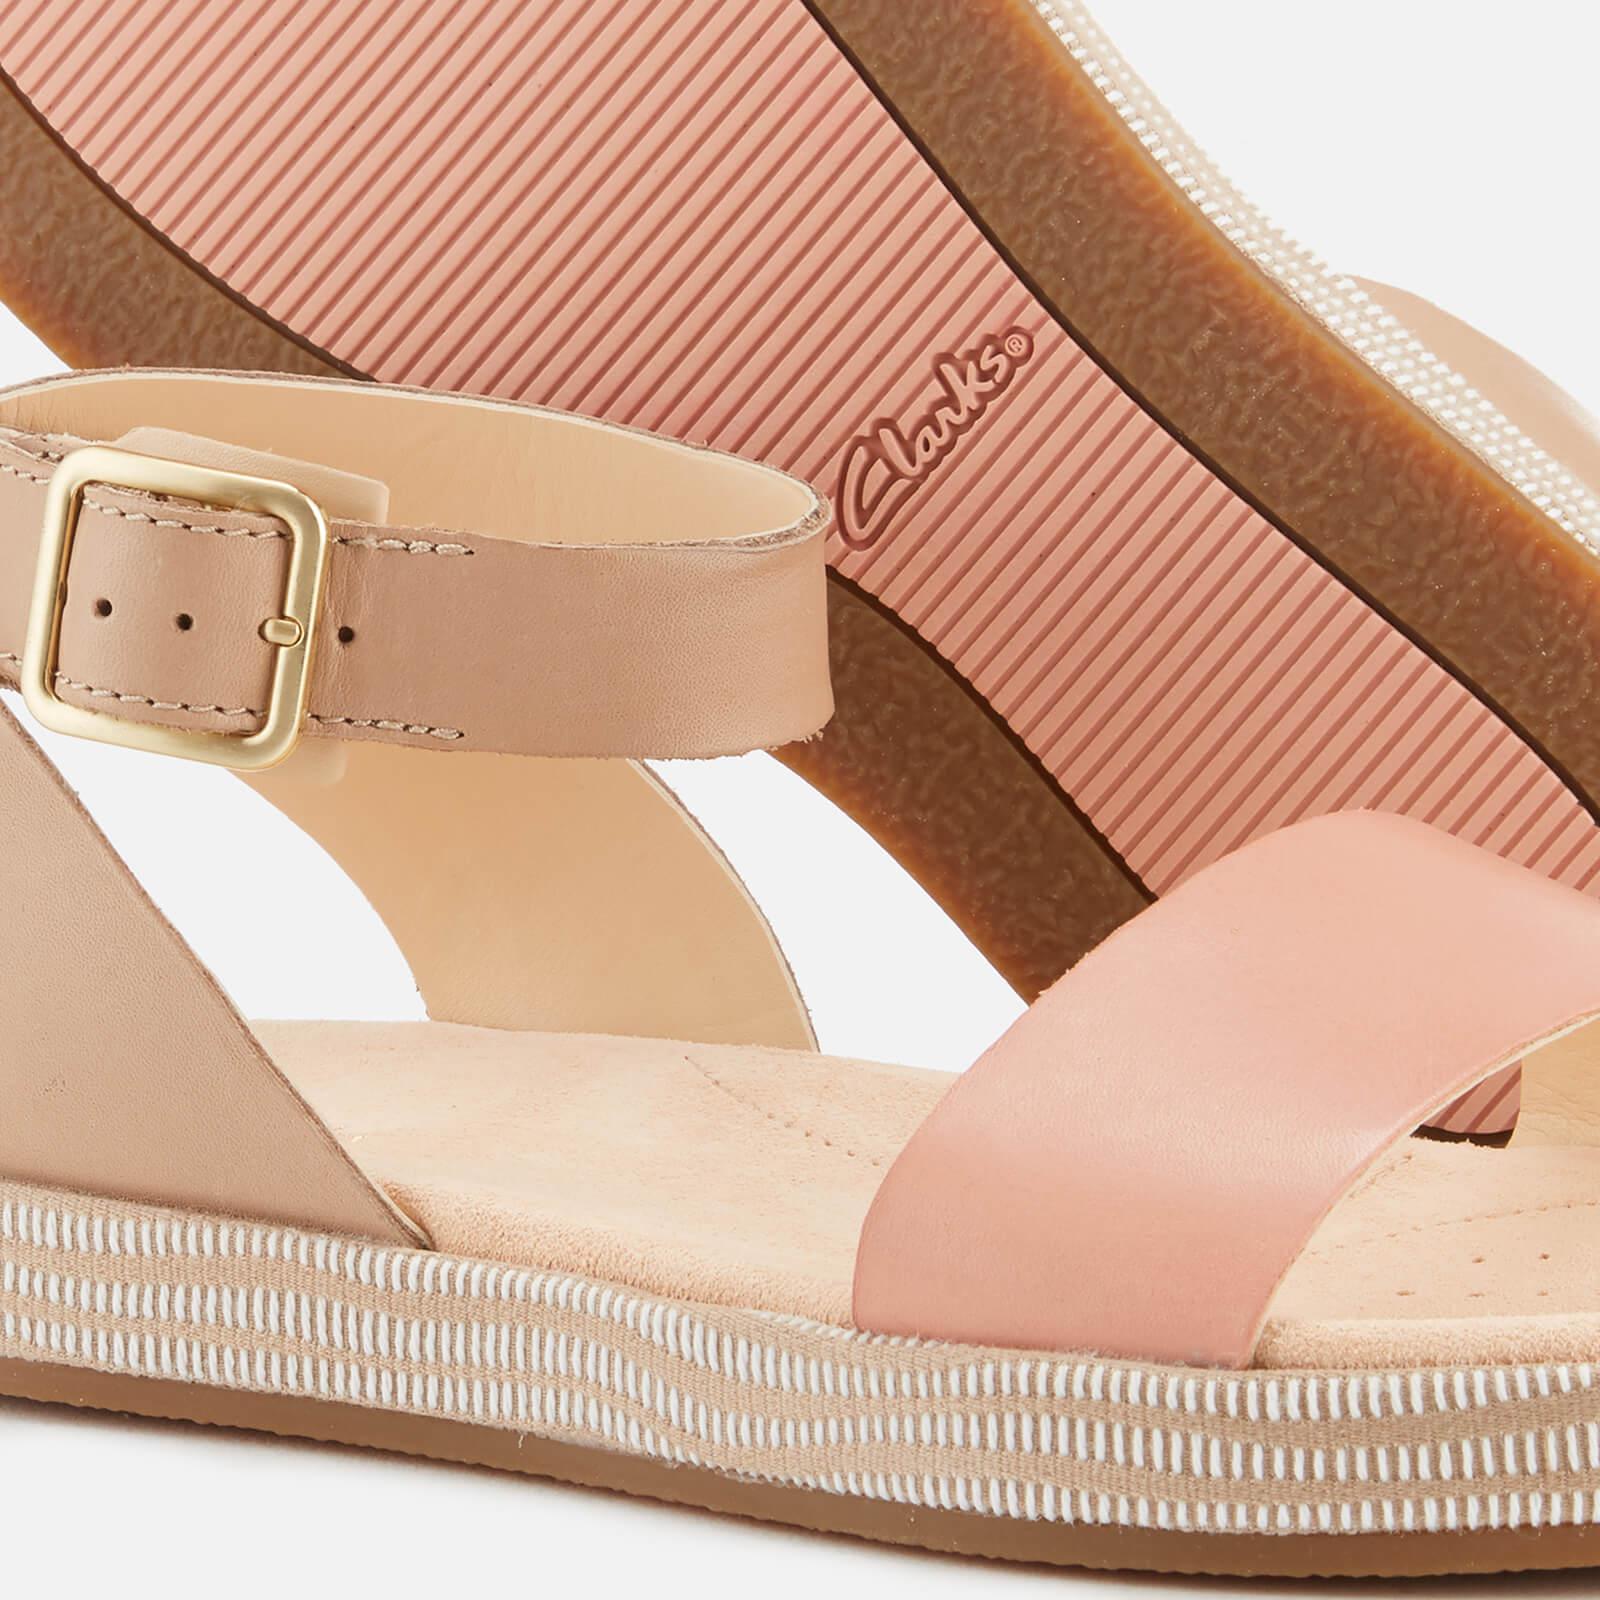 Clarks Botanic Ivy Double Strap Flat Sandals in Pink | Lyst